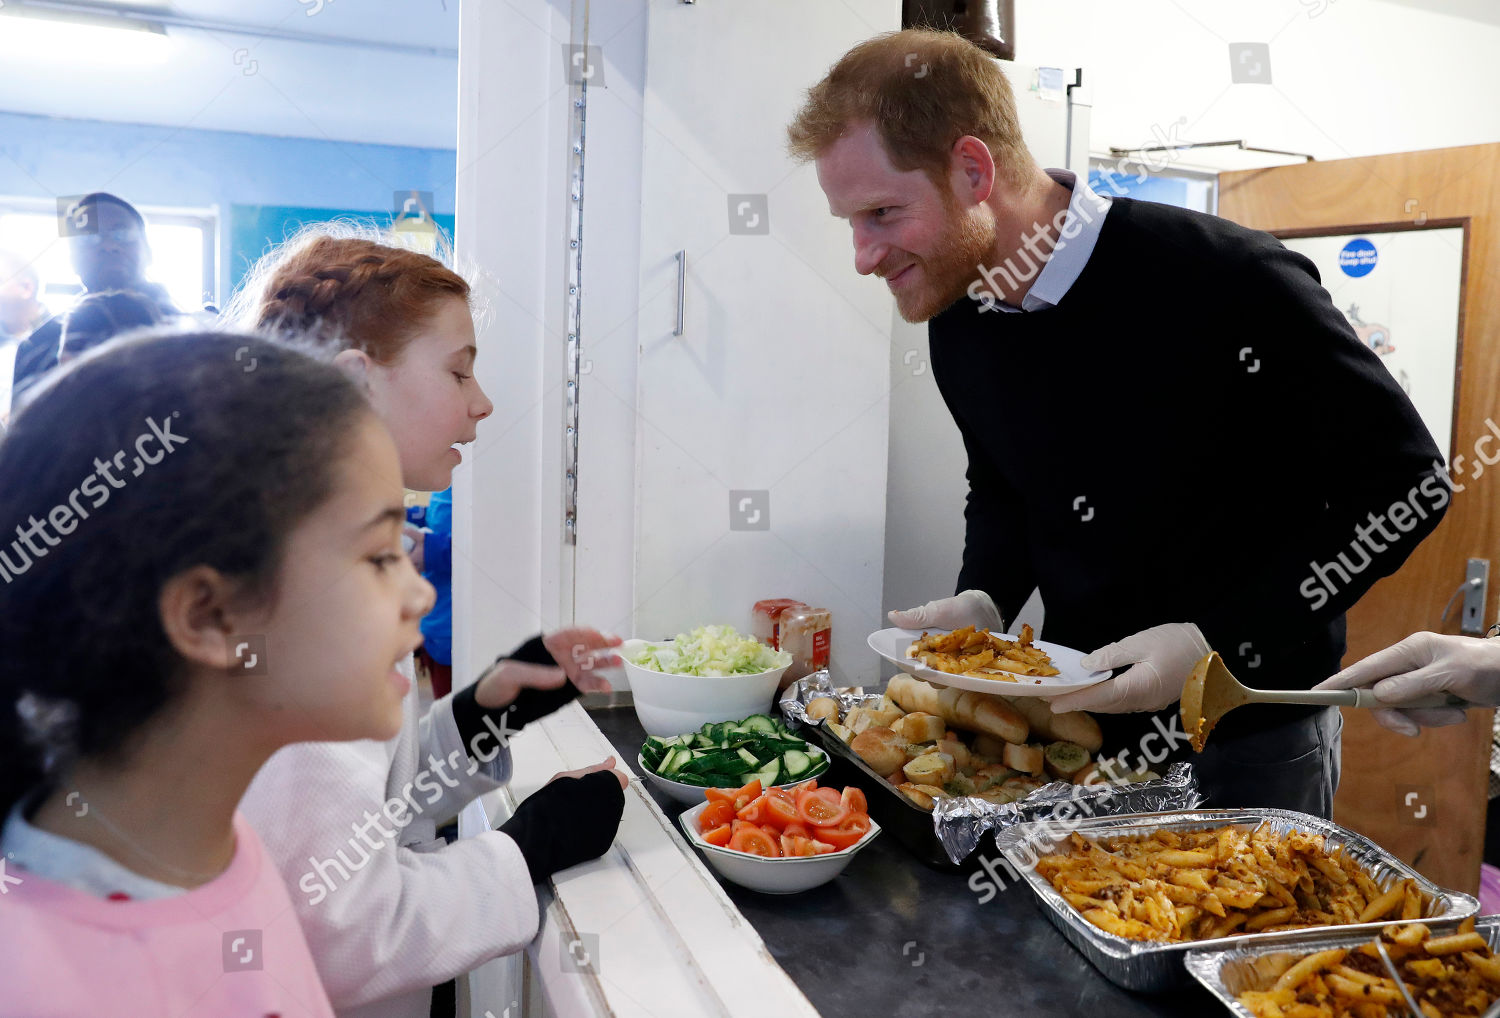 prince-harry-visit-to-fit-and-fed-half-term-initiative-streatham-london-uk-shutterstock-editorial-10110713s.jpg